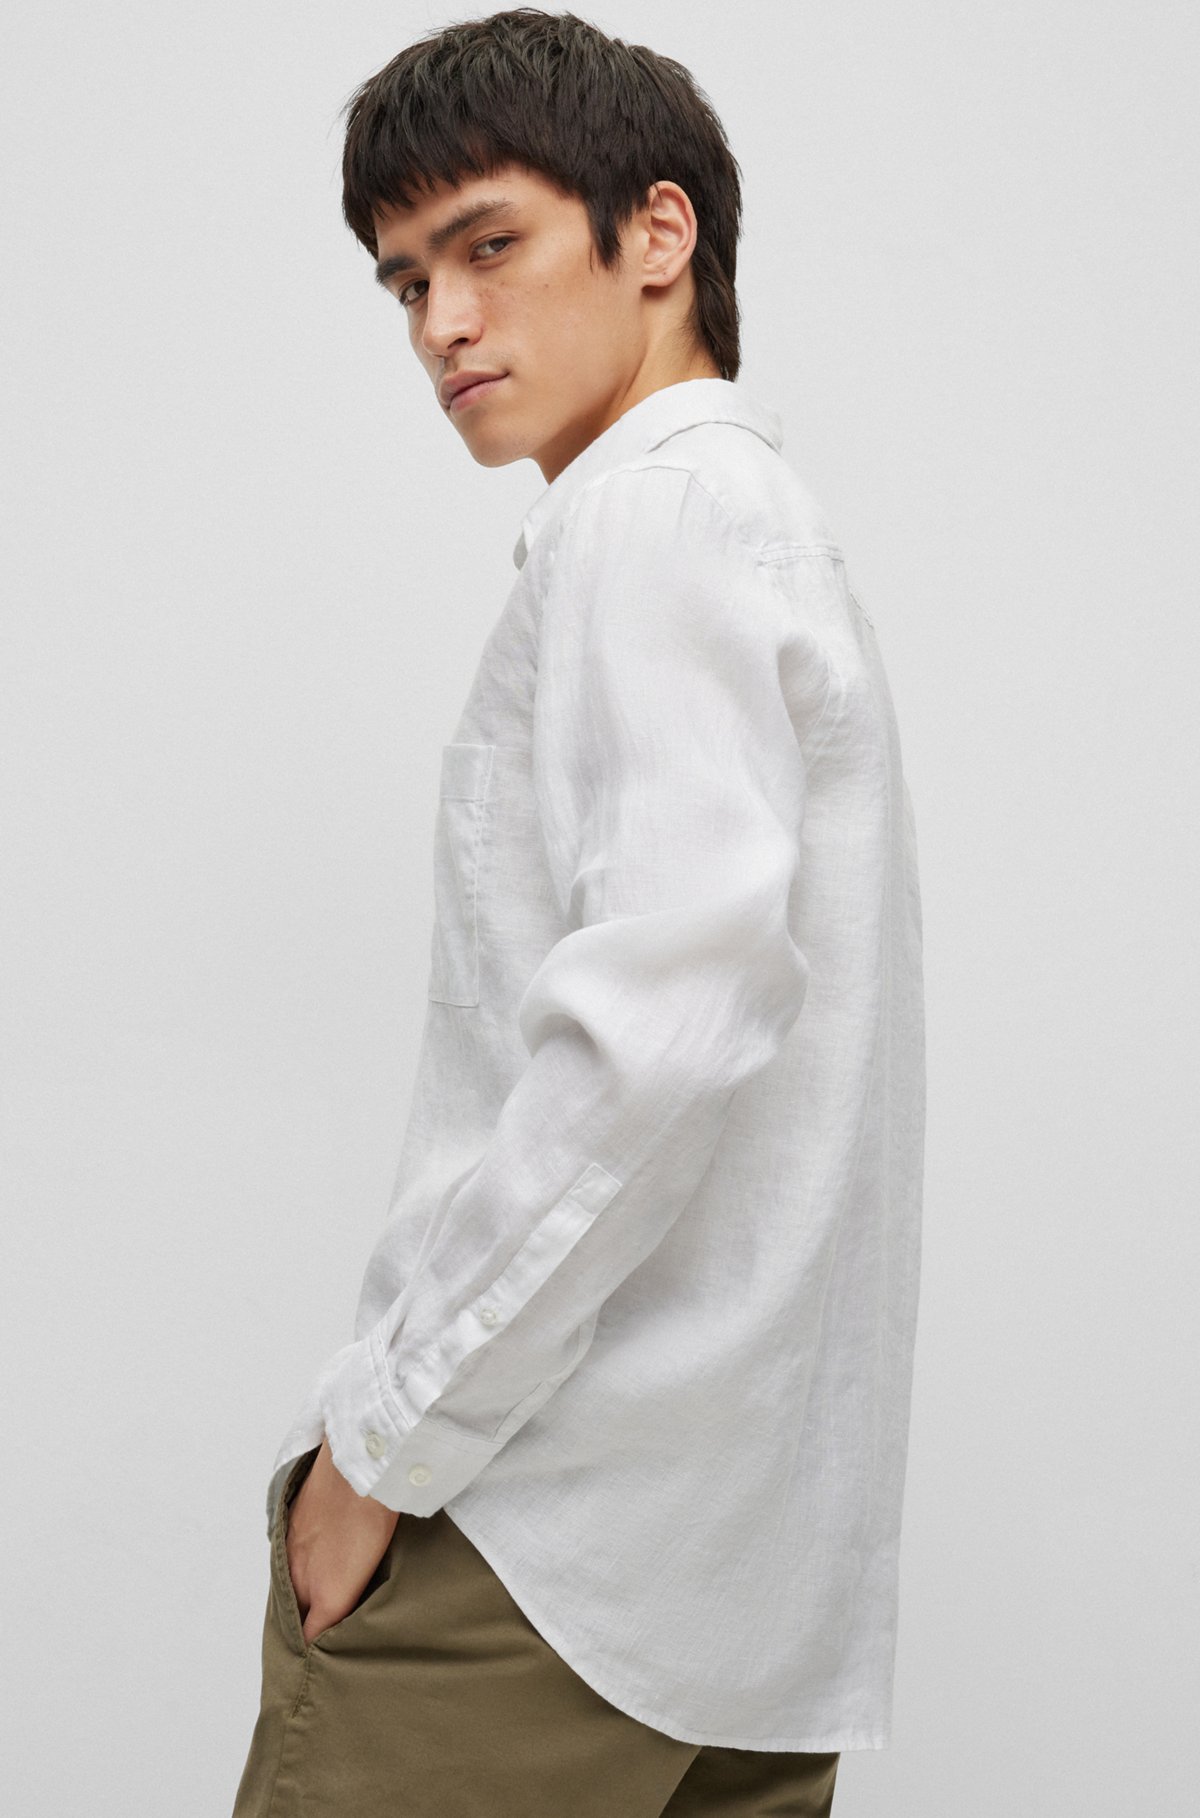 Relaxed-fit long-sleeved shirt in pure linen, White